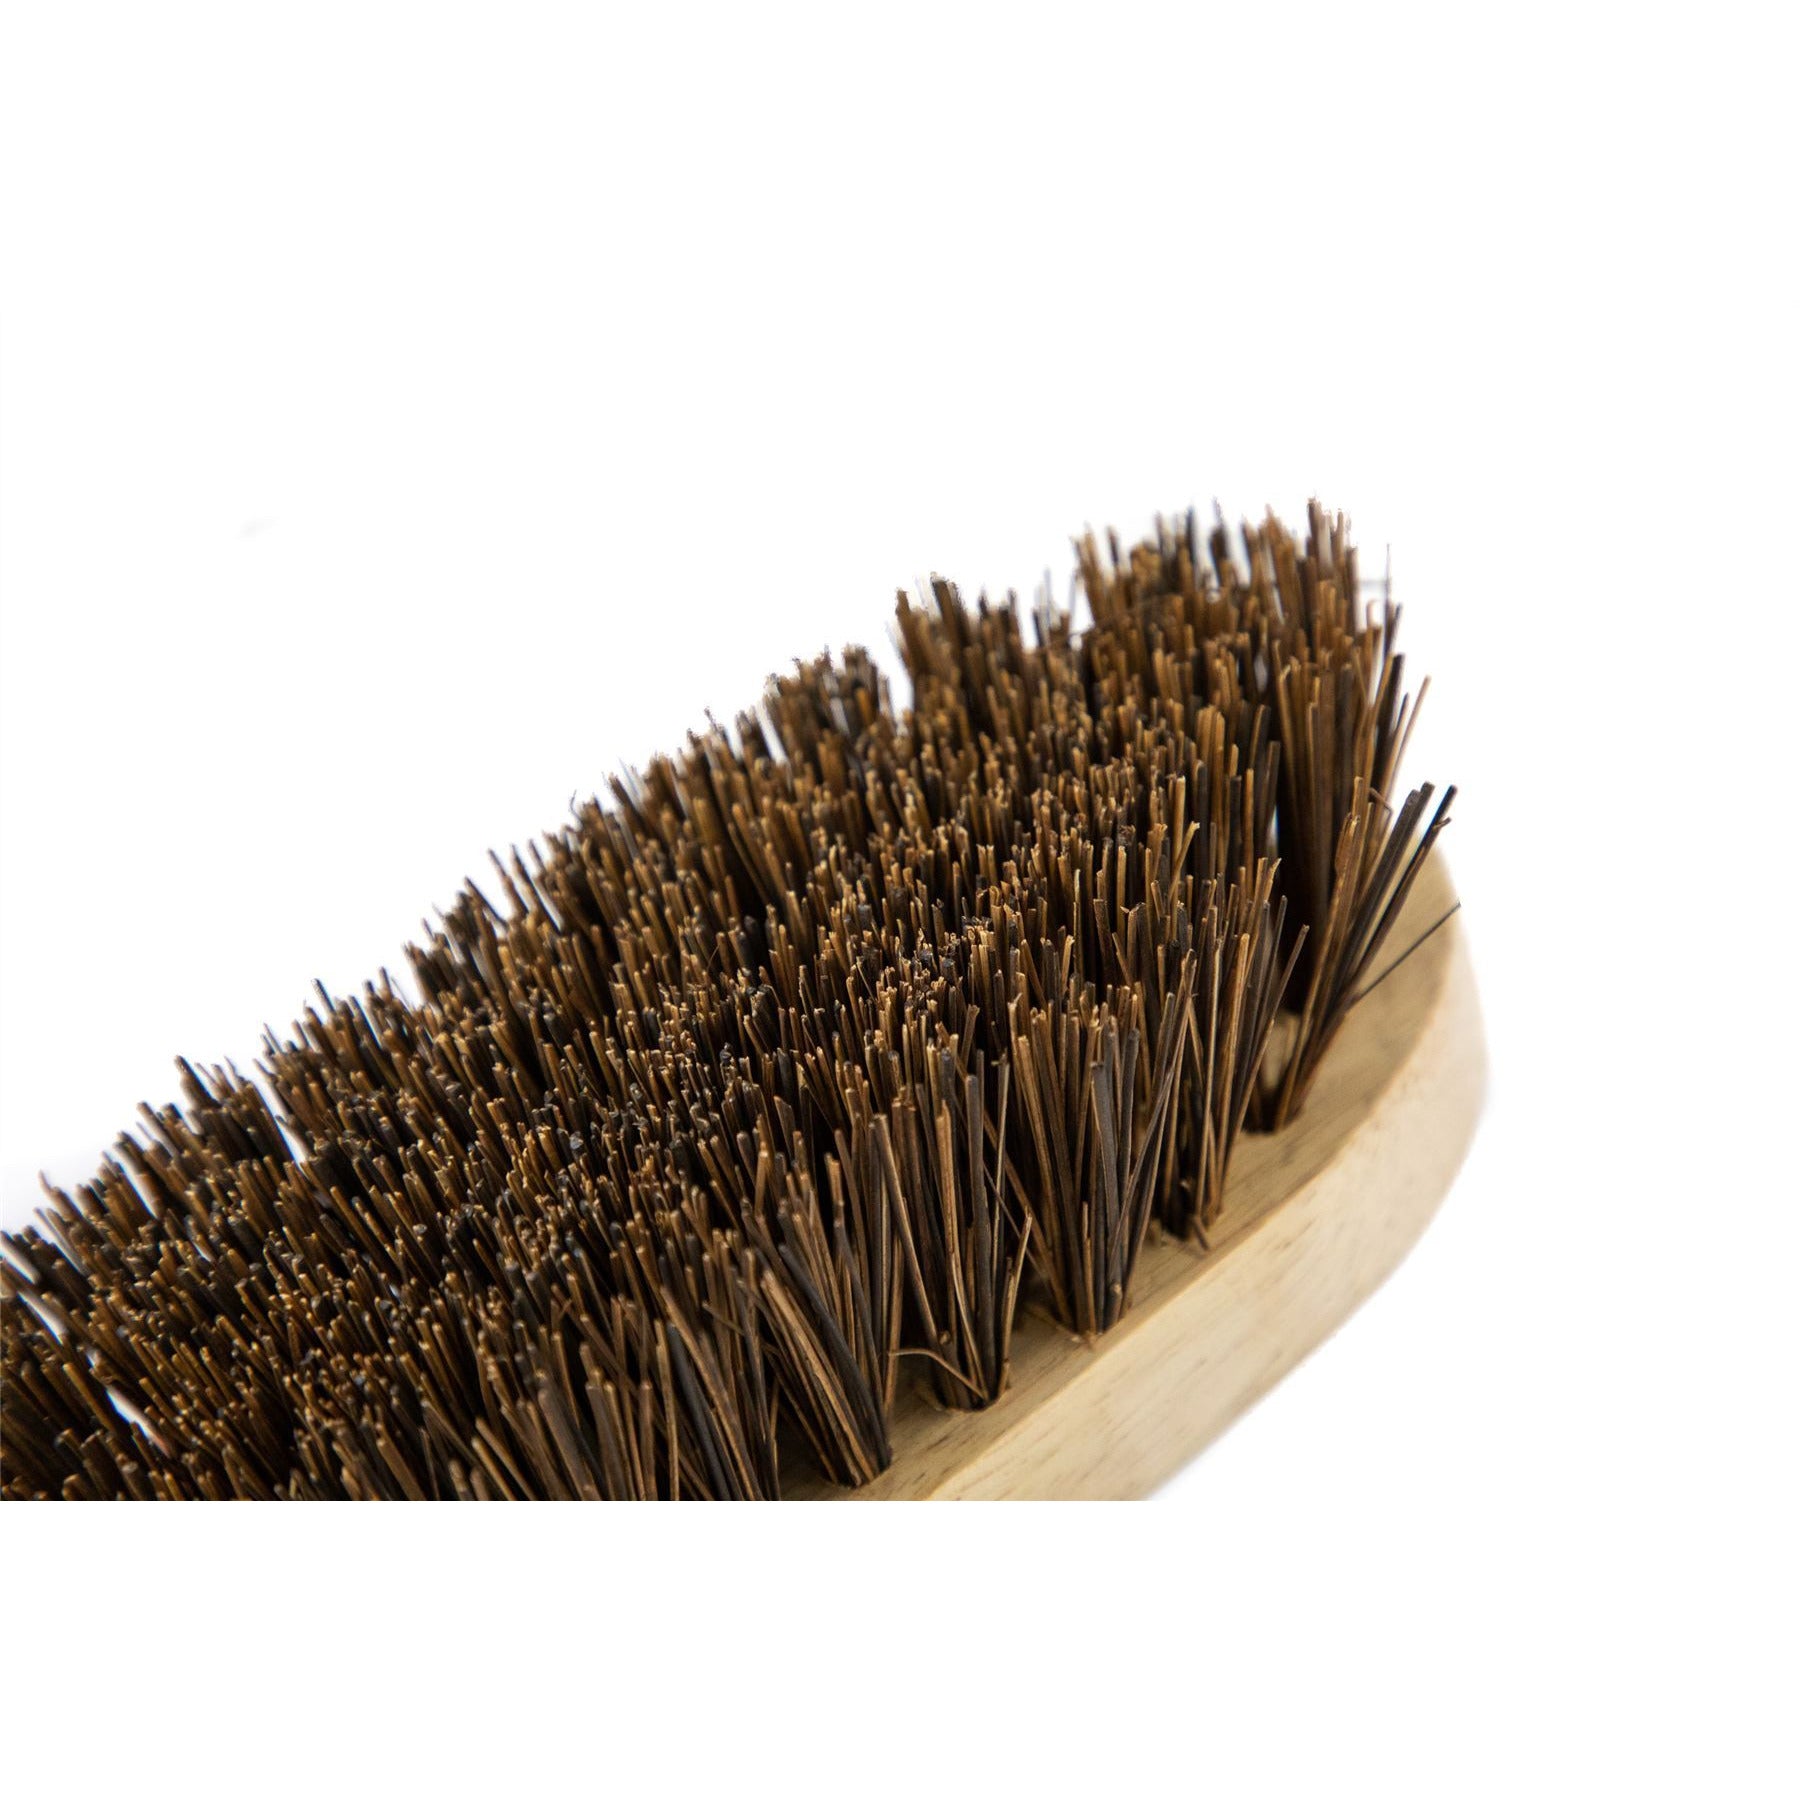 Newman and Cole Wooden Natural Bassine Scrubbing Brush - The Dustpan and Brush Store